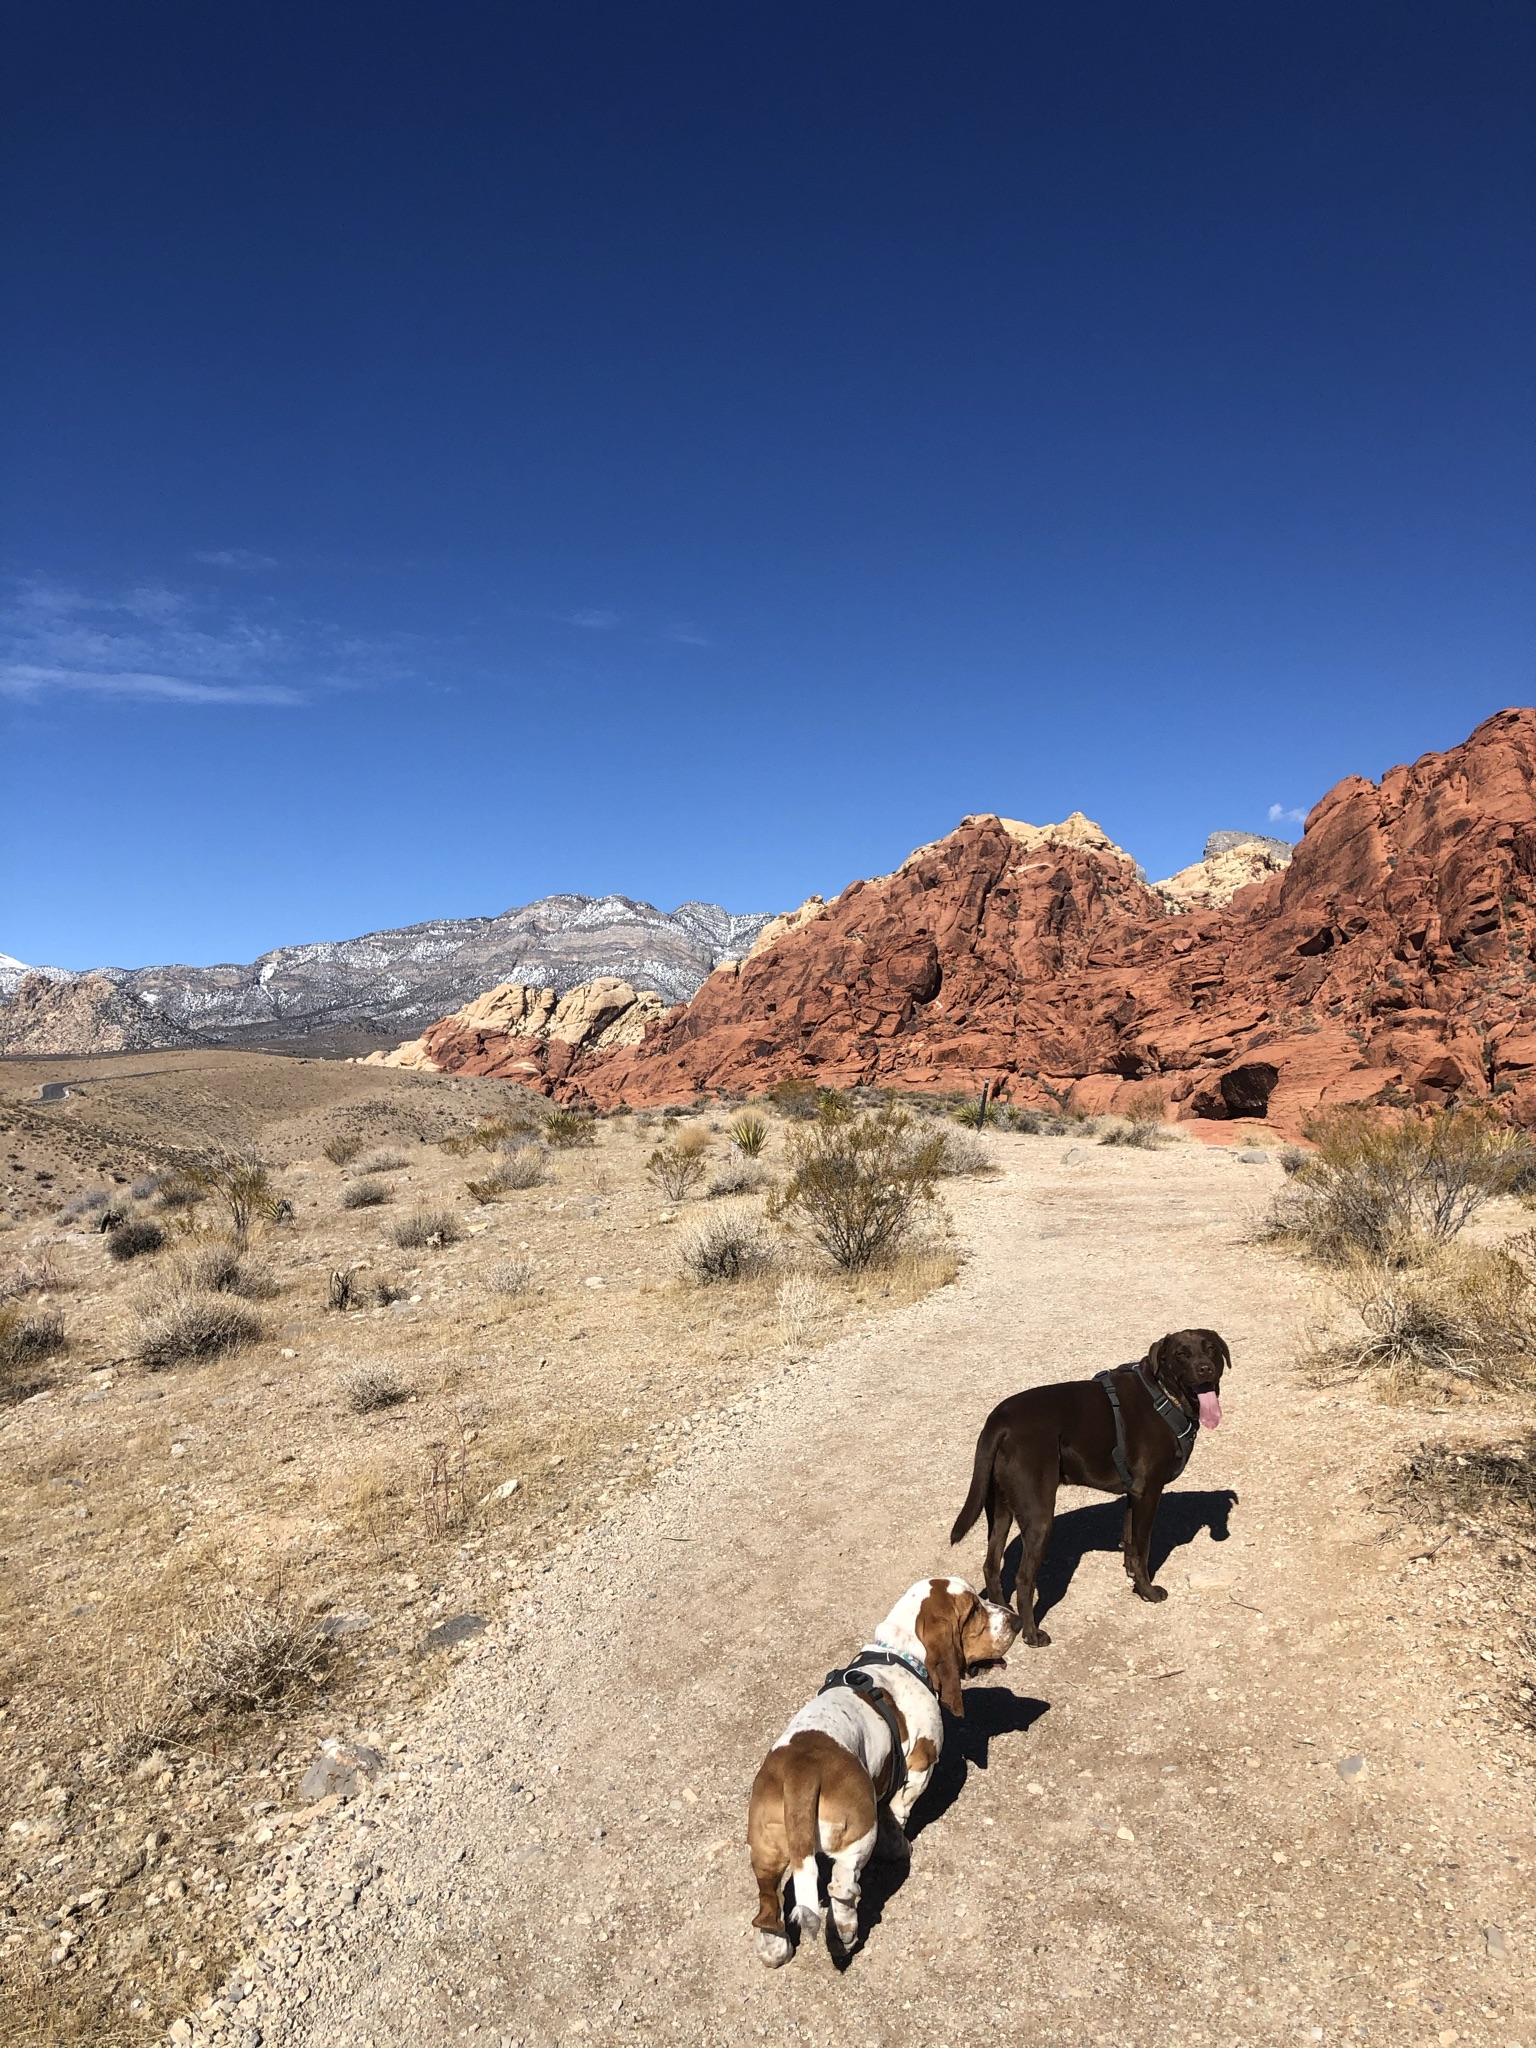 Red Rock is one of the best places to hike in 2021